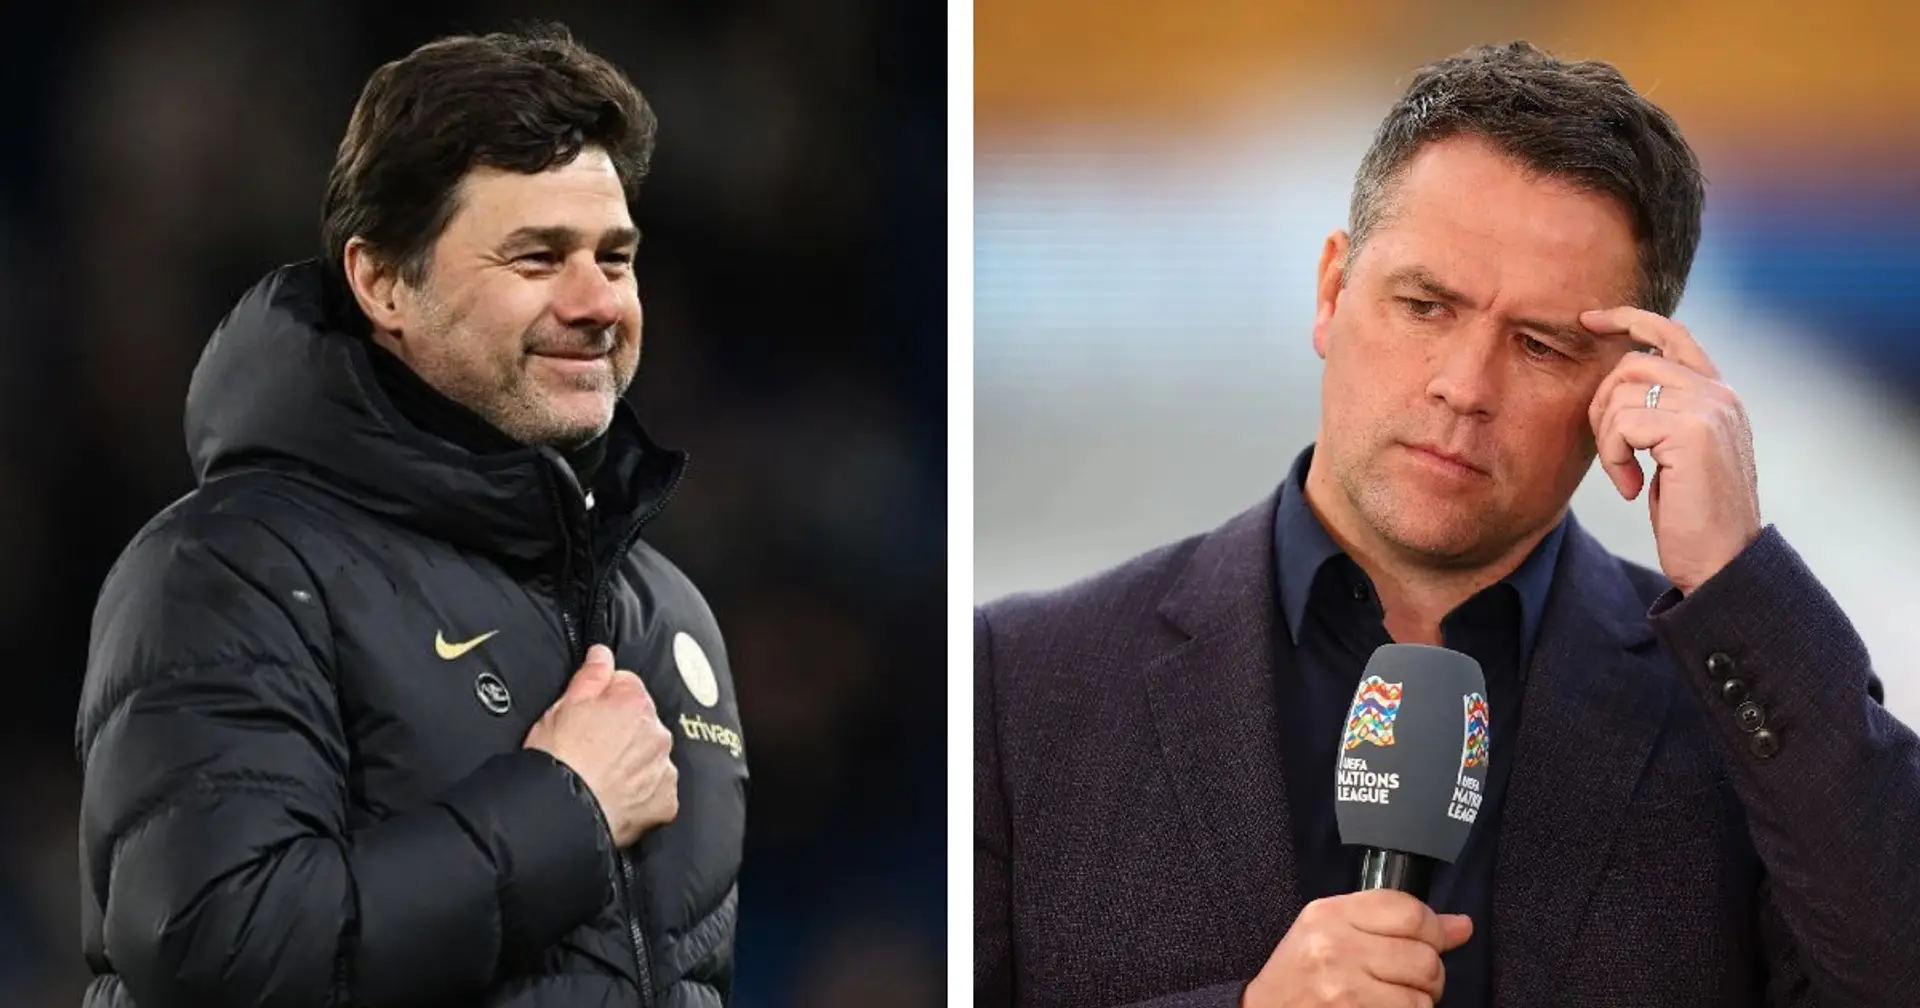 'He misses an awful lot of chances': Michael Owen names Chelsea player who Pochettino believes in more than others